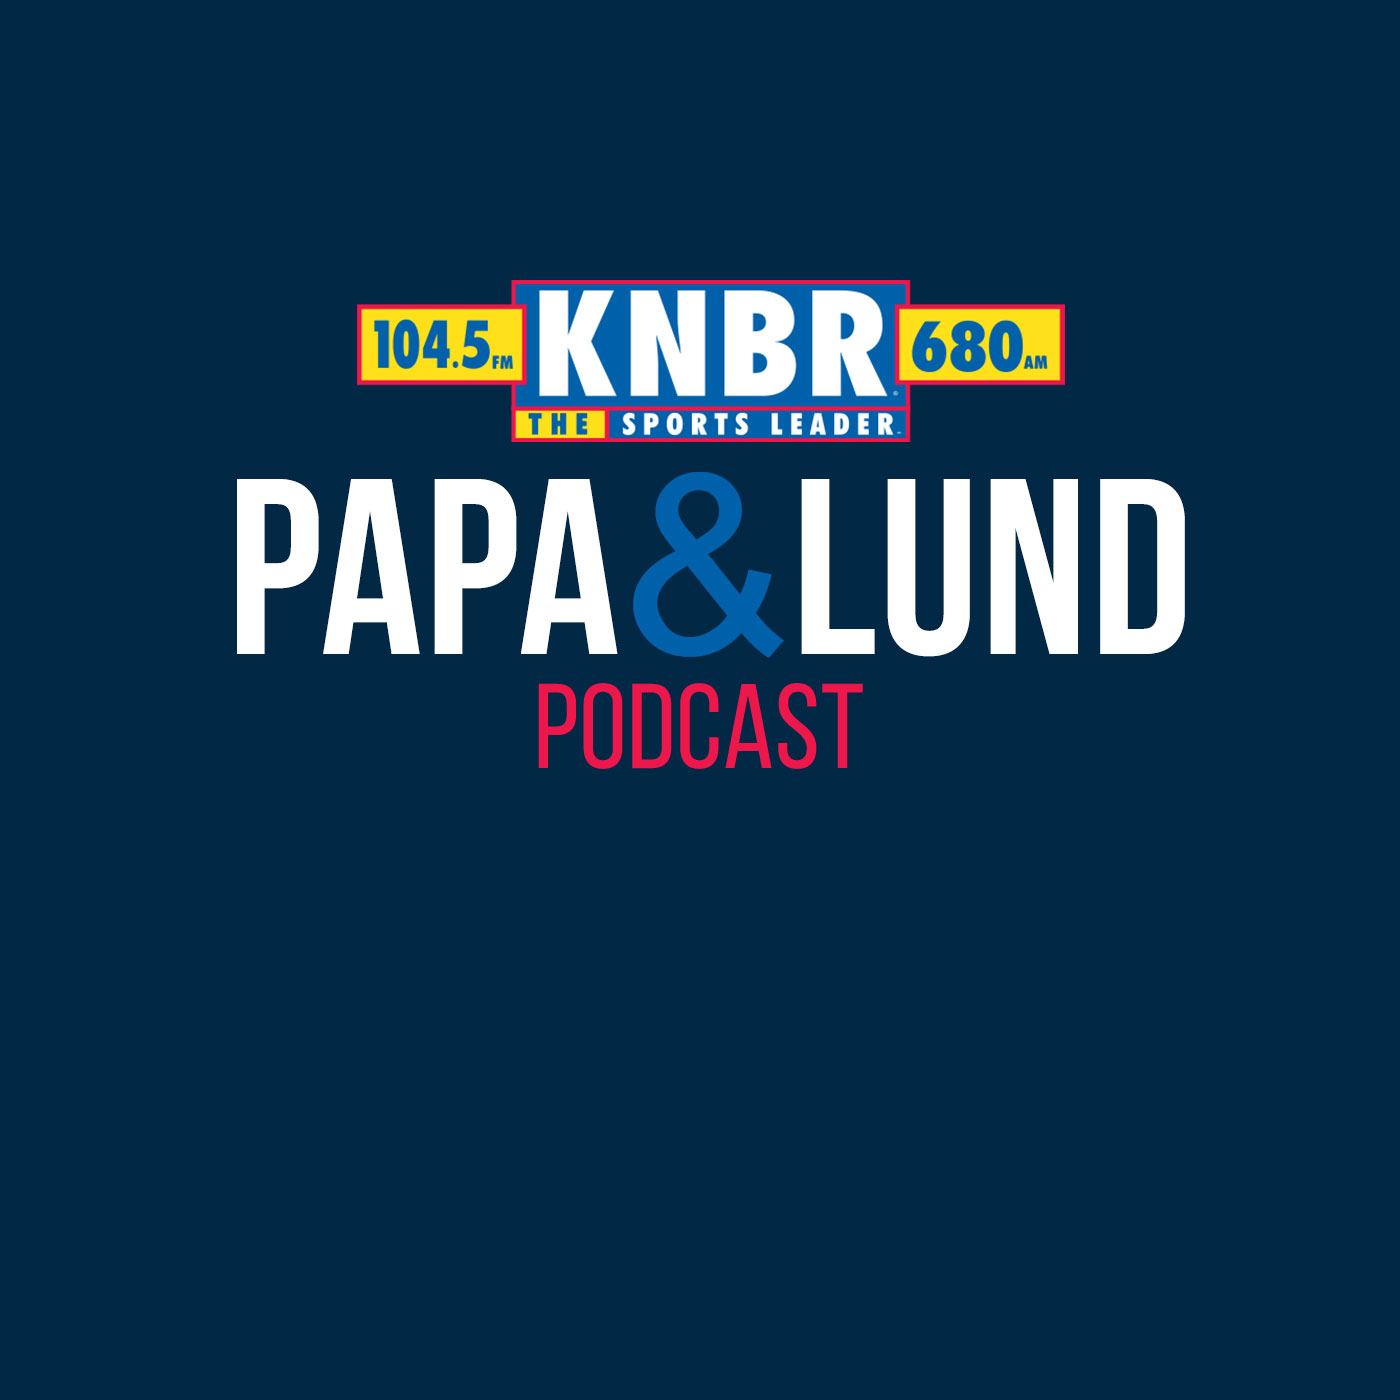 5-26 Andrew Baggarly joins Papa & Lund to break down the Giants team coming together behind the young guys and some great pitching